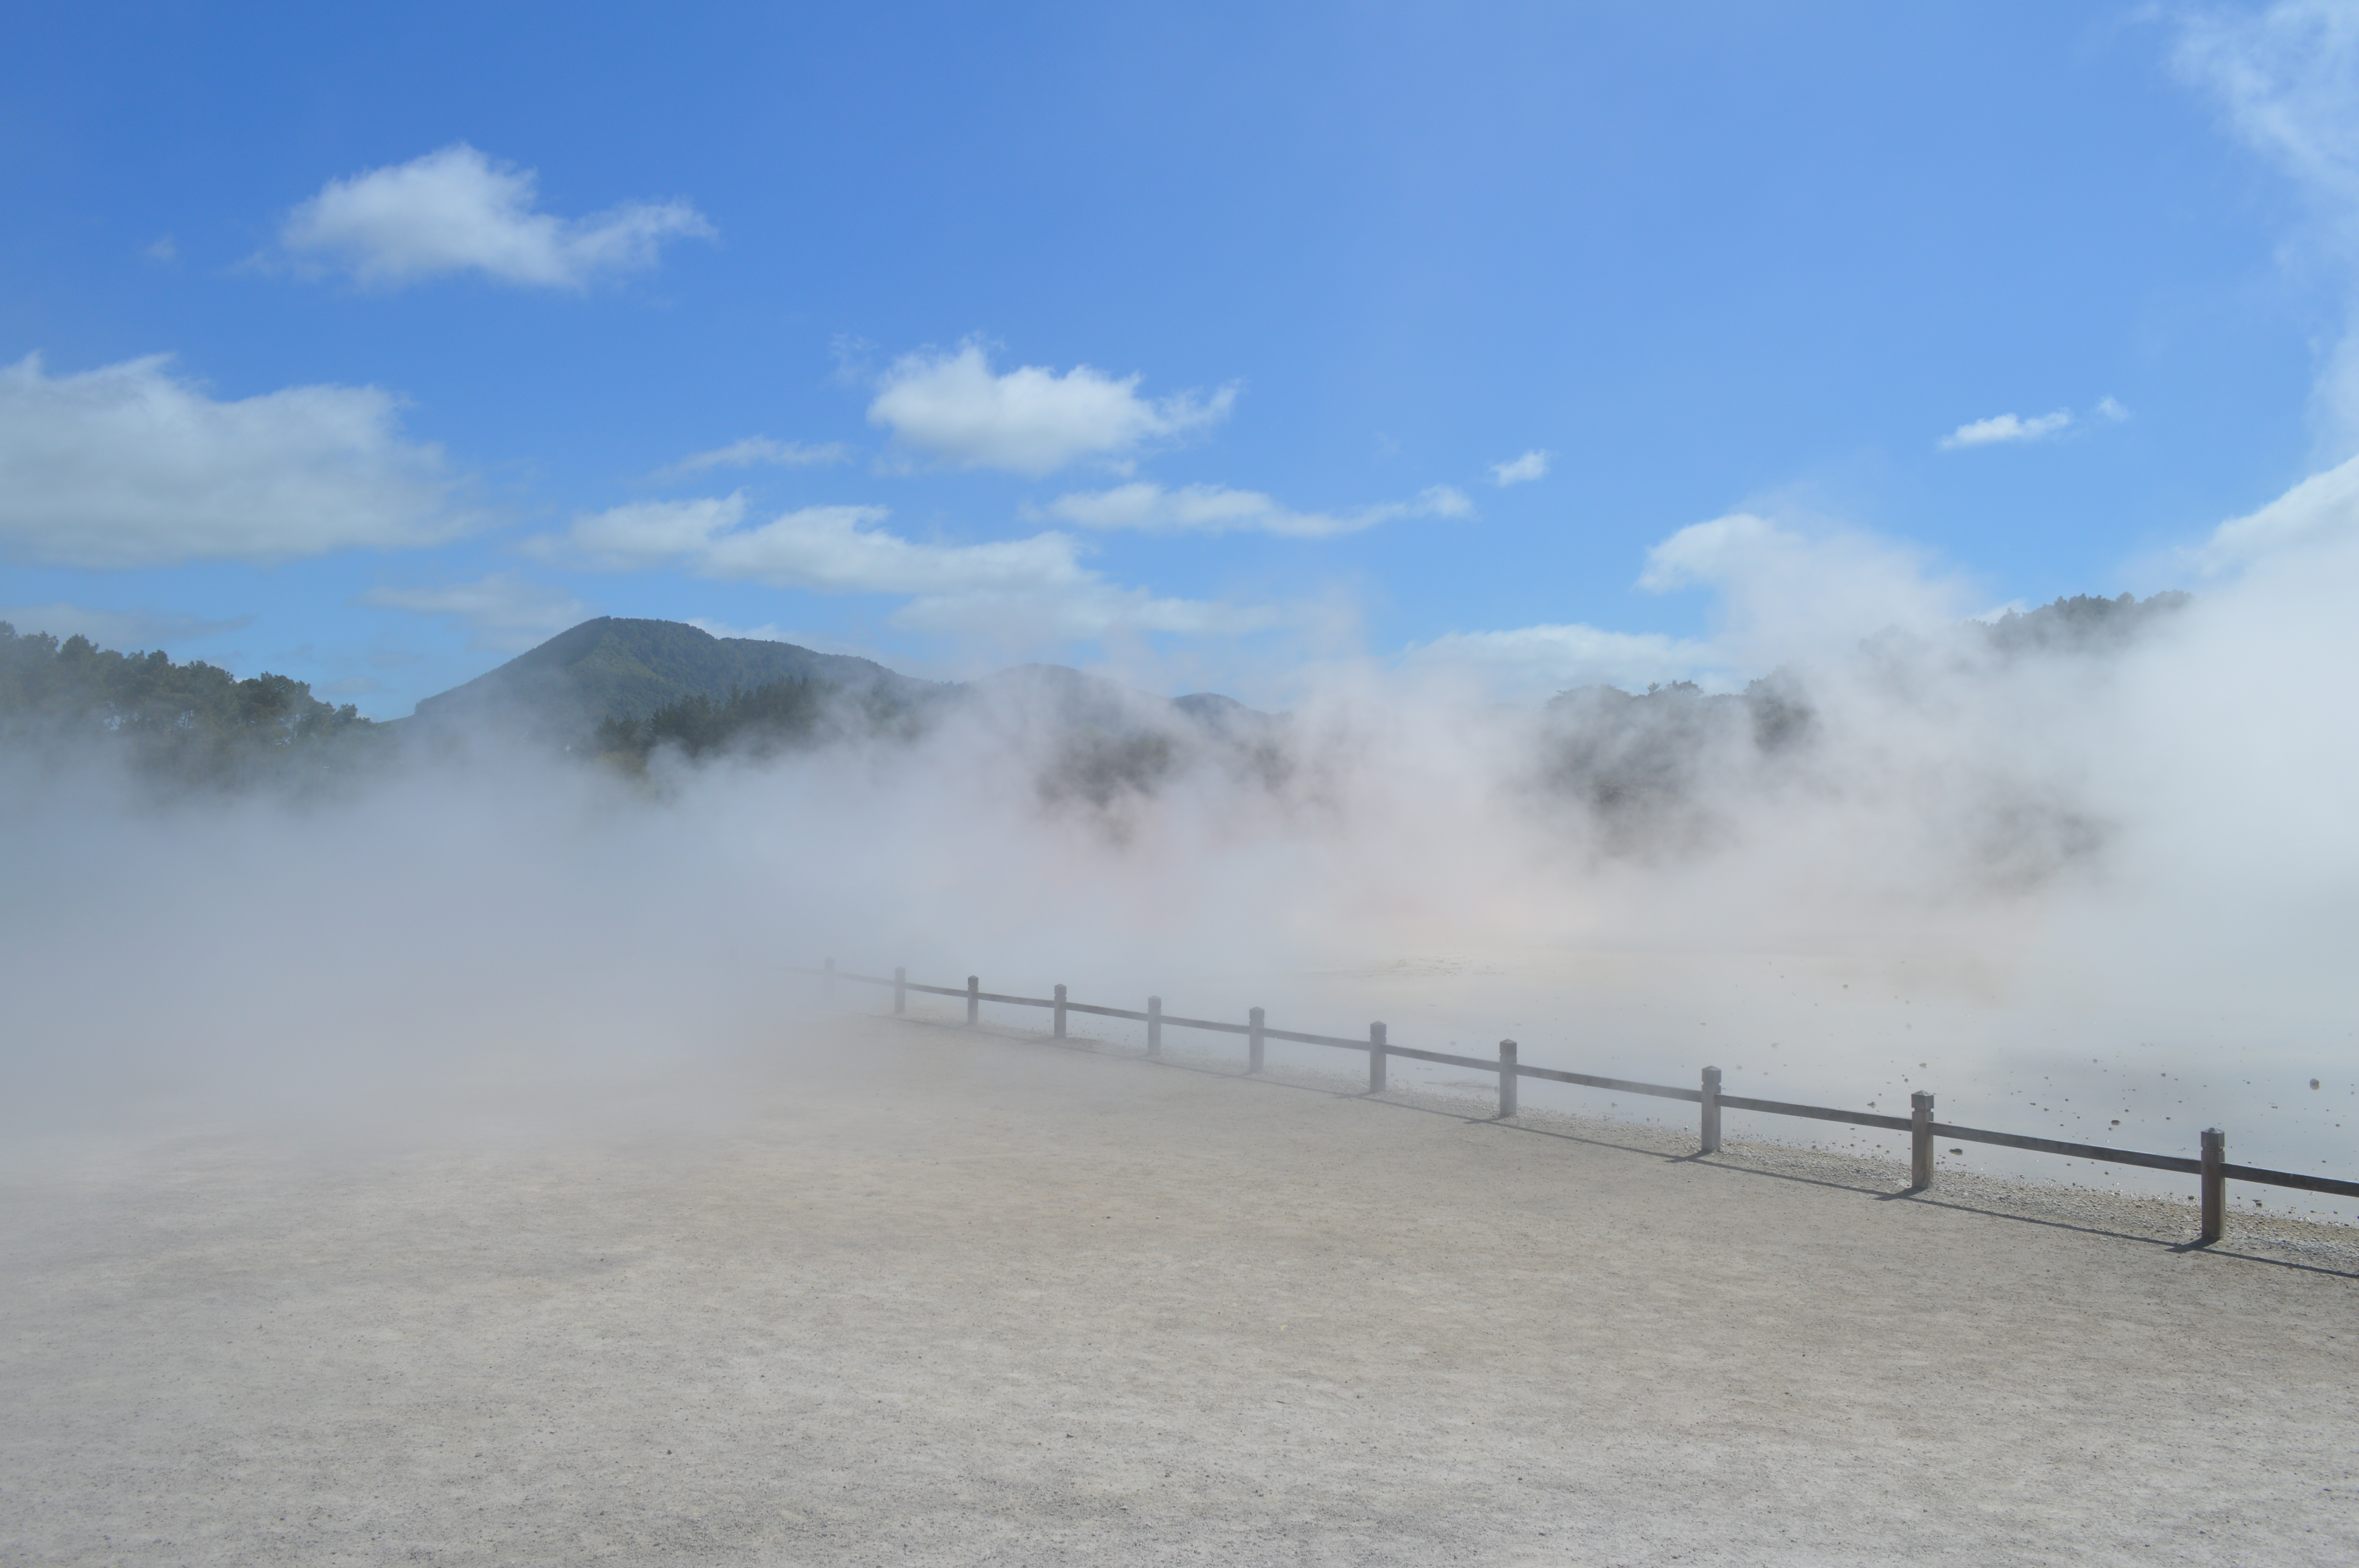 Capturing the steam rising across the array of colours created by the thermal pools